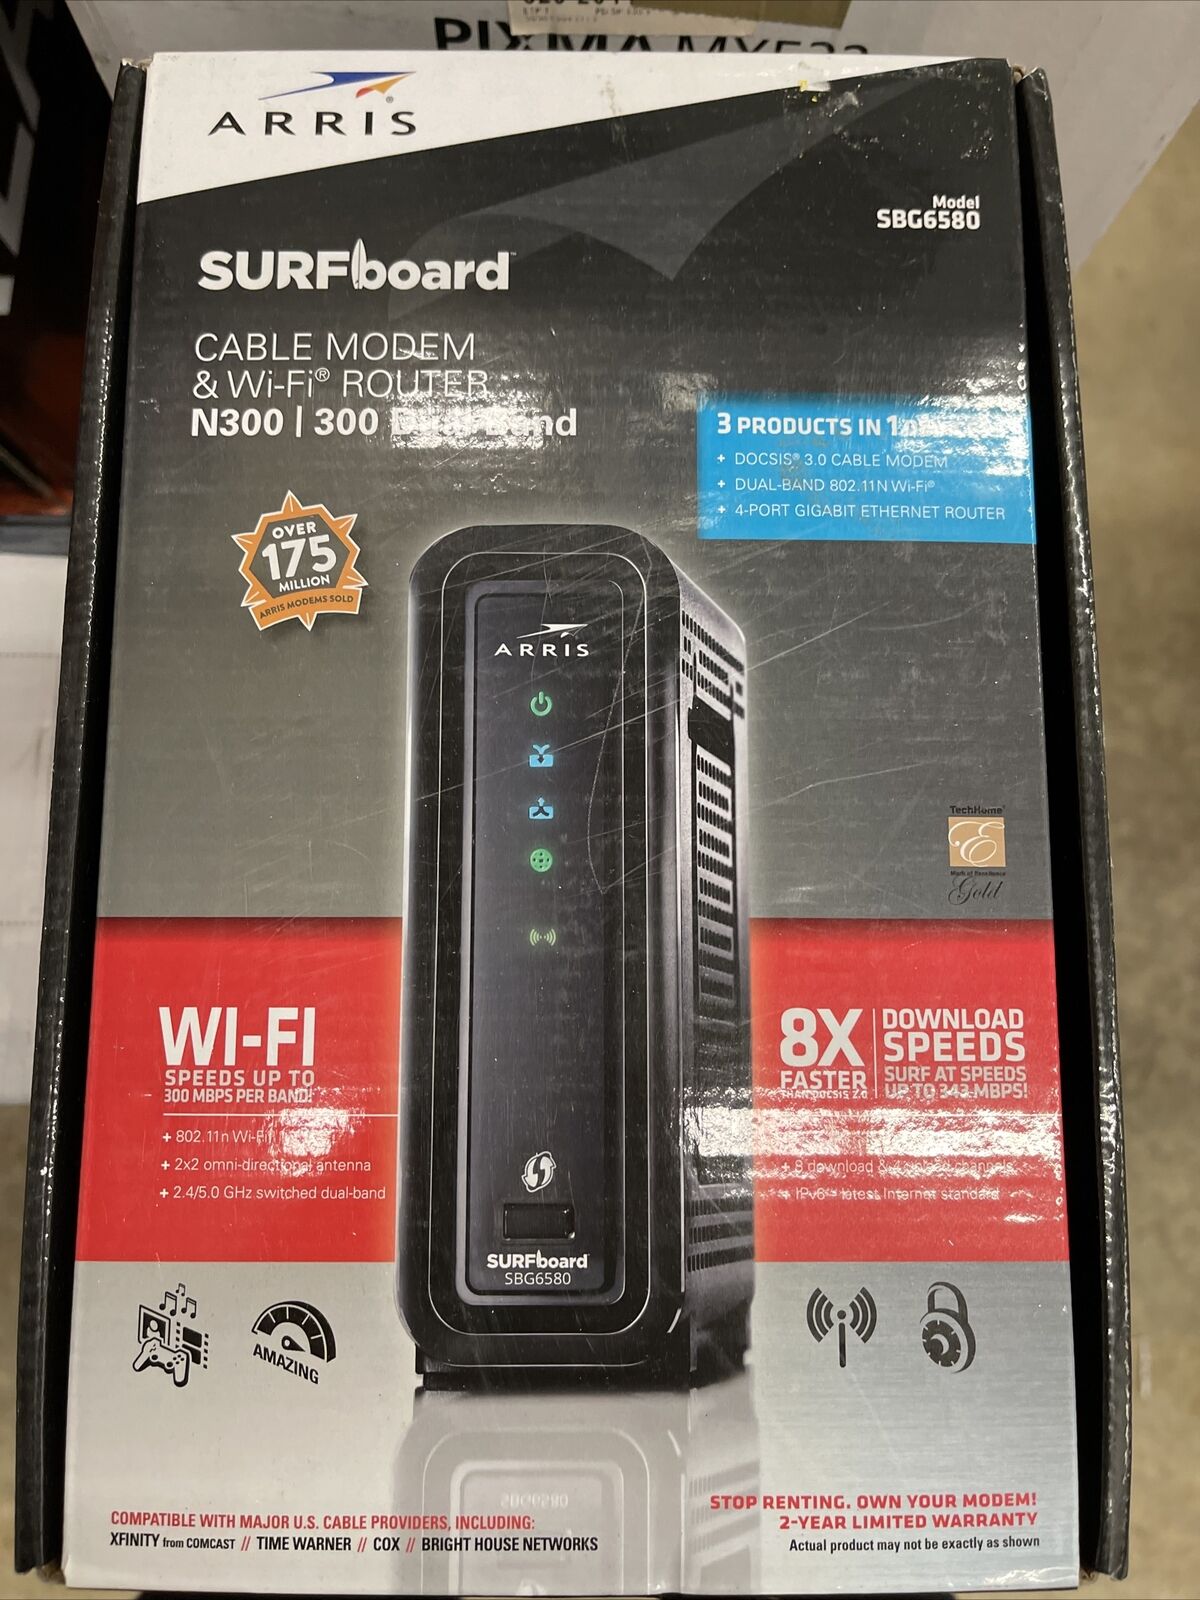 ARRIS Surfboard SBG6580-2 300 Mbps 4 Port Cable Modem and Wi-Fi Router Brand New